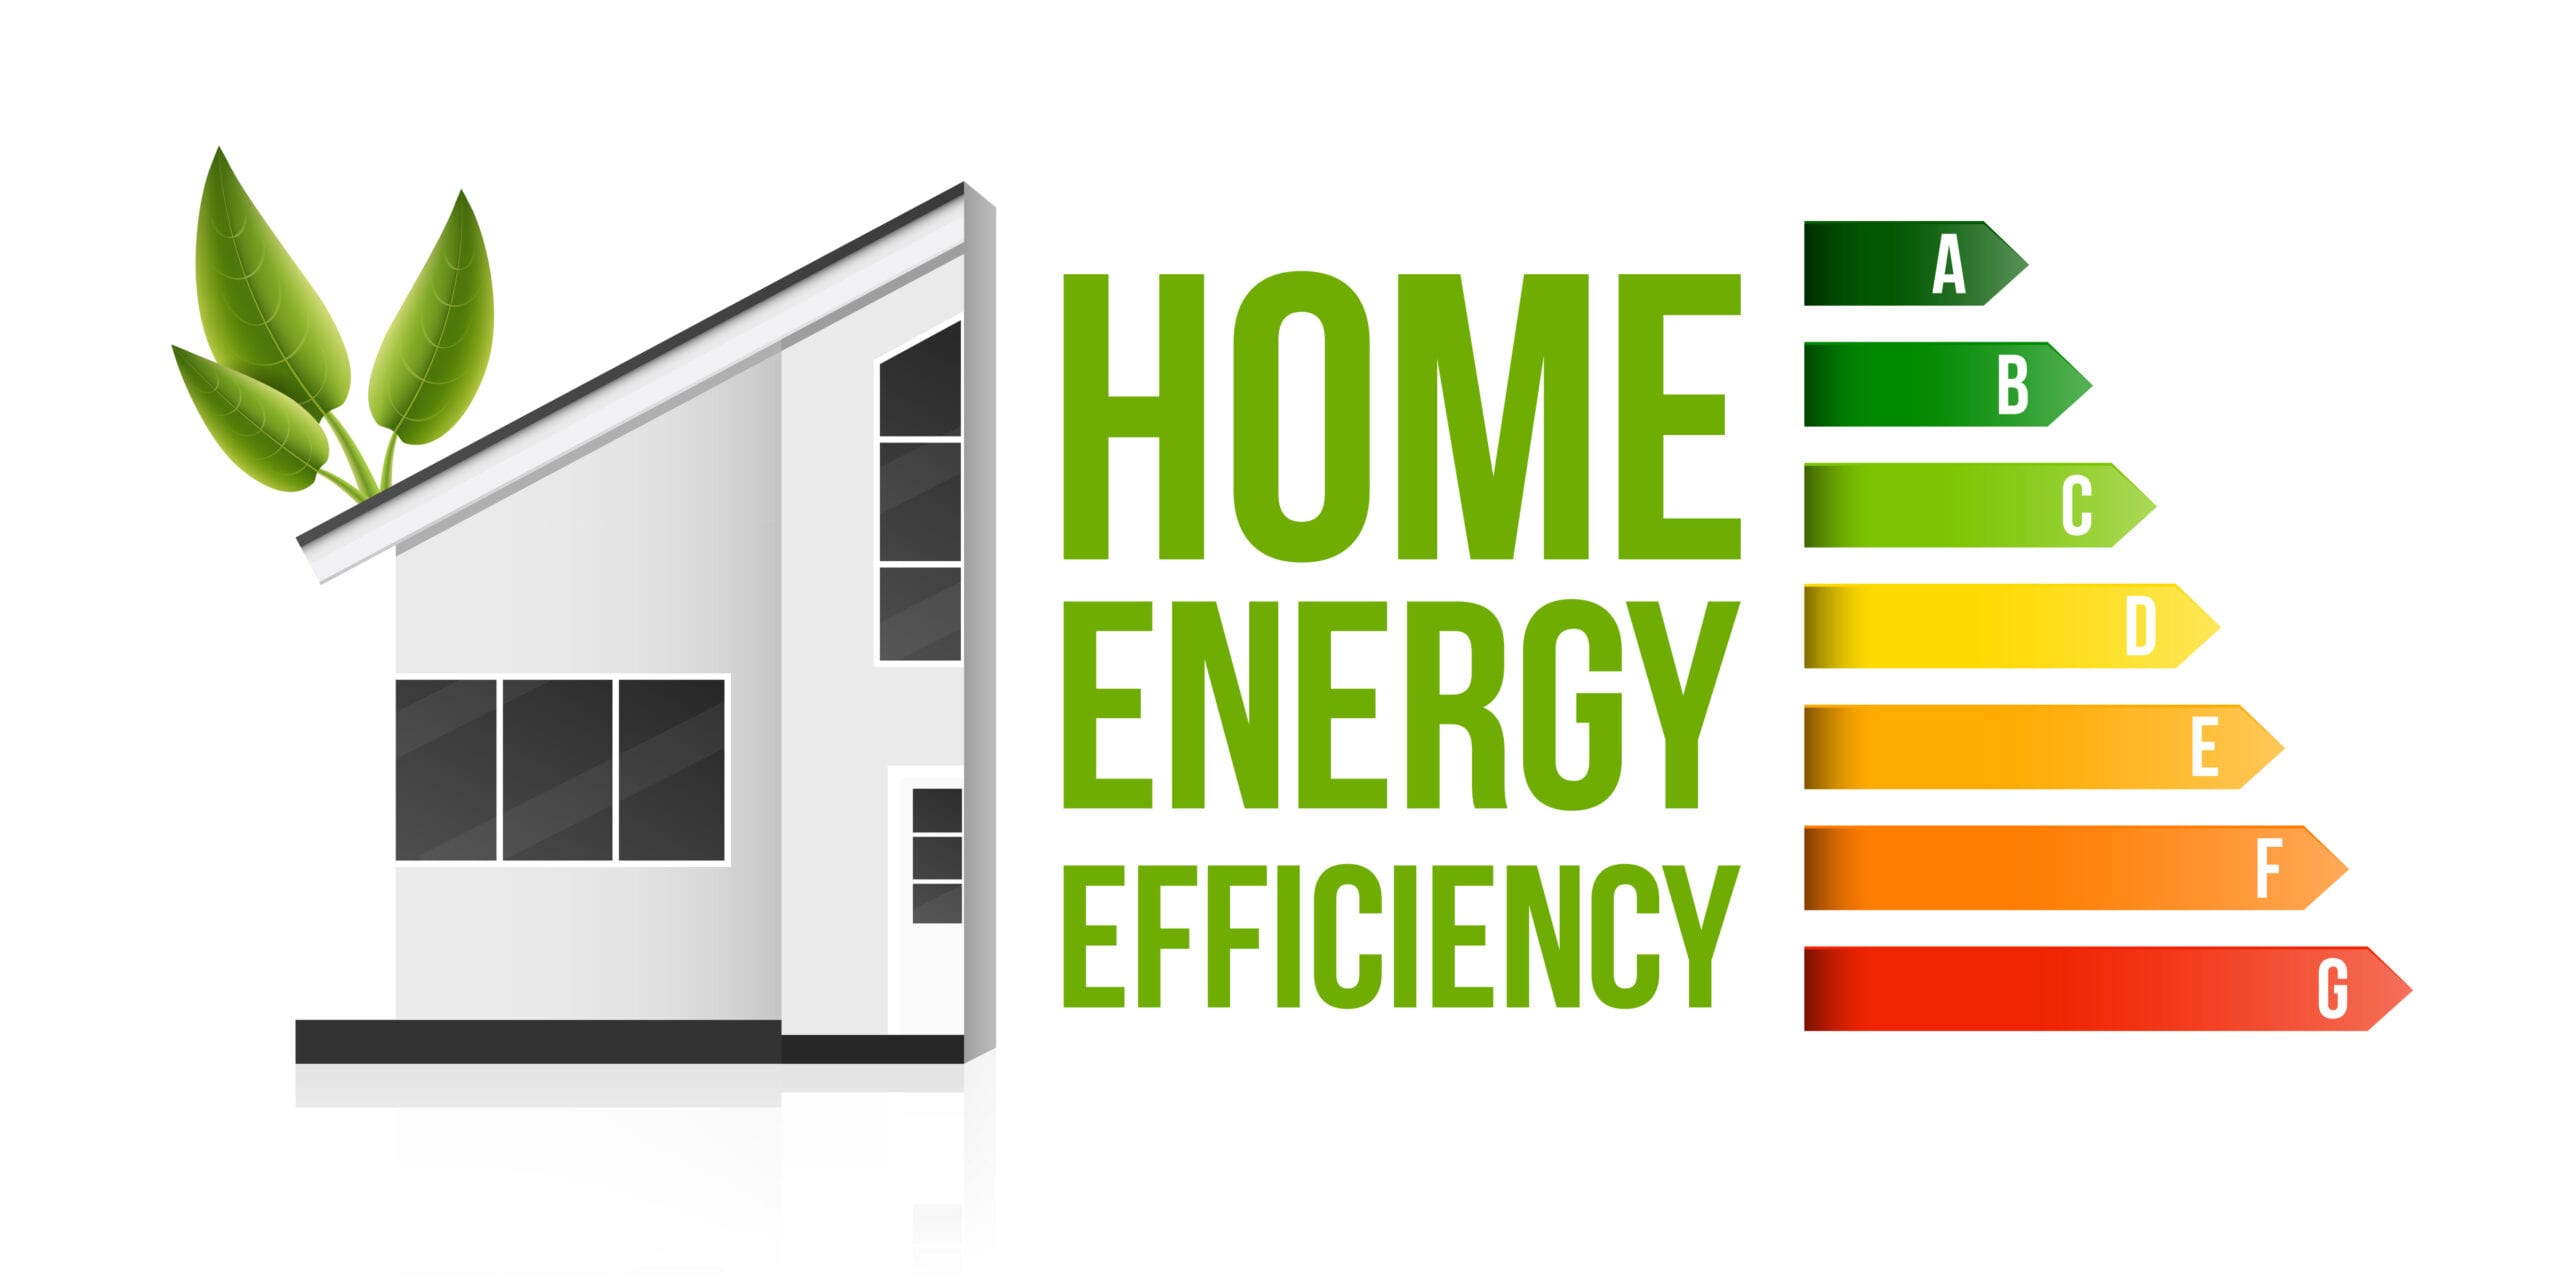 How to improve your home’s efficiency